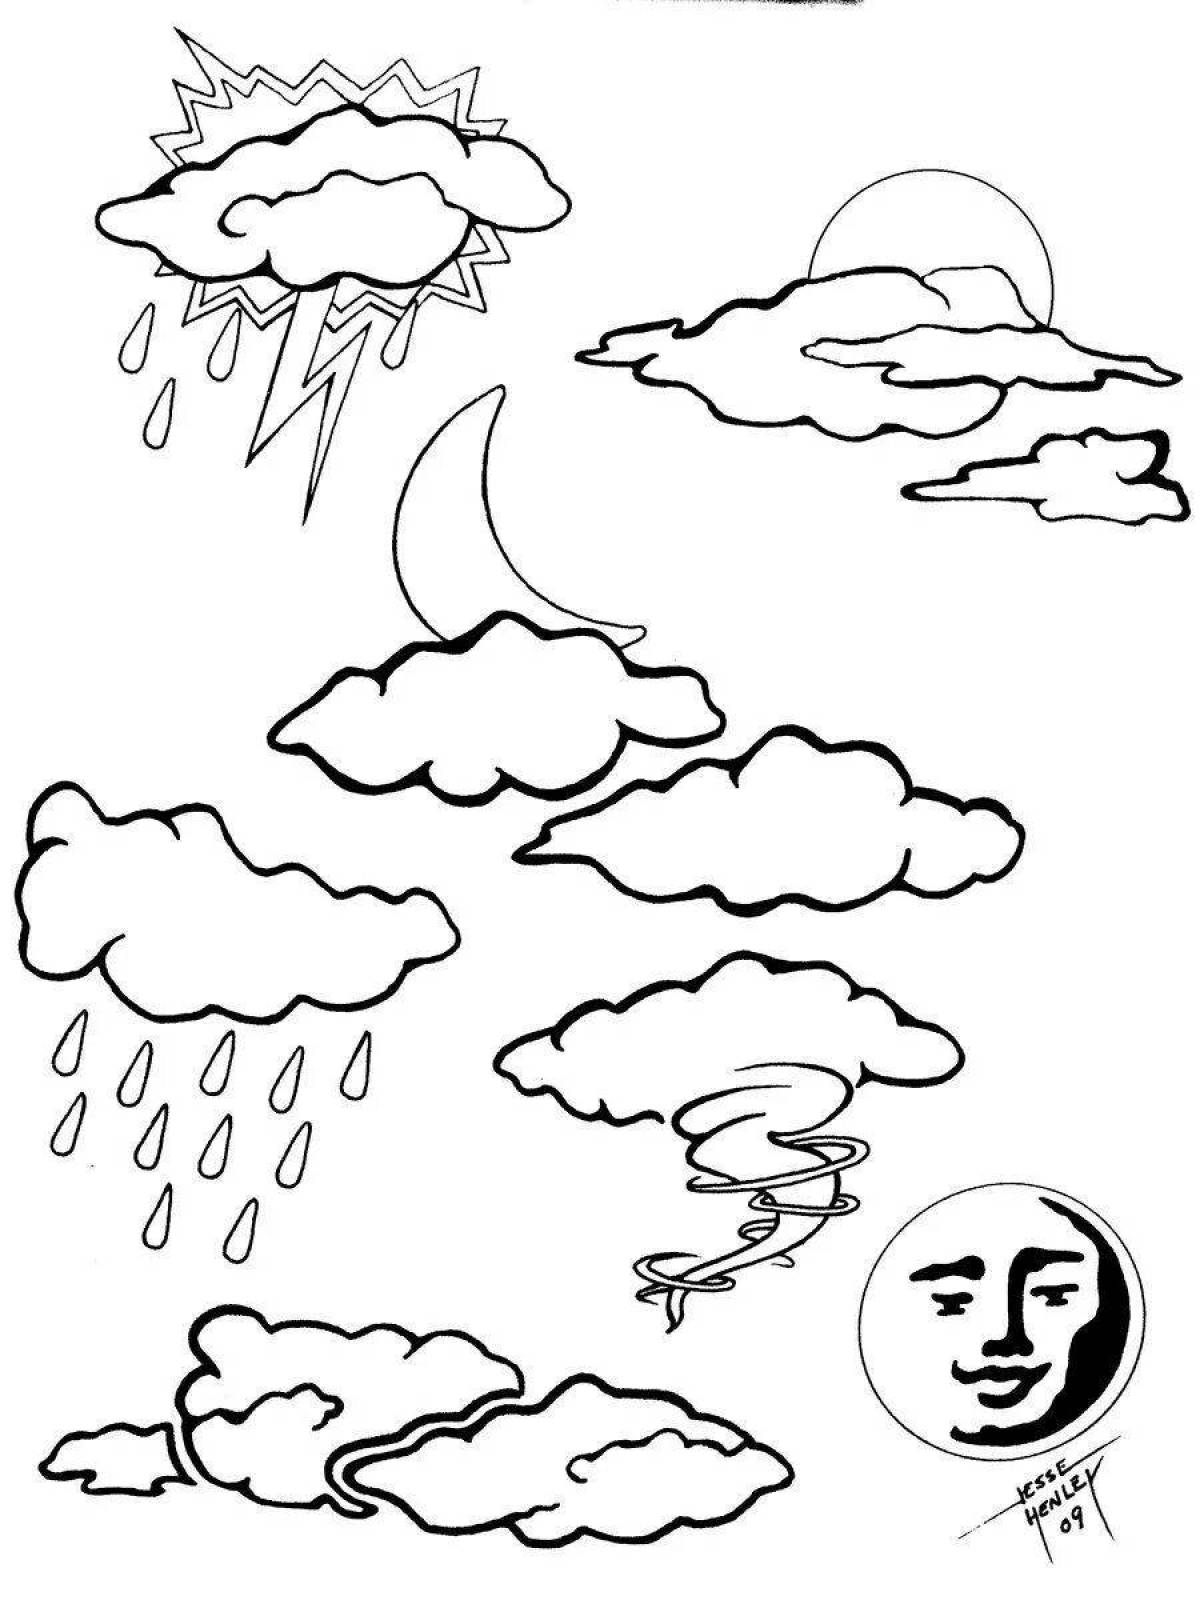 Playful weather forecast coloring page